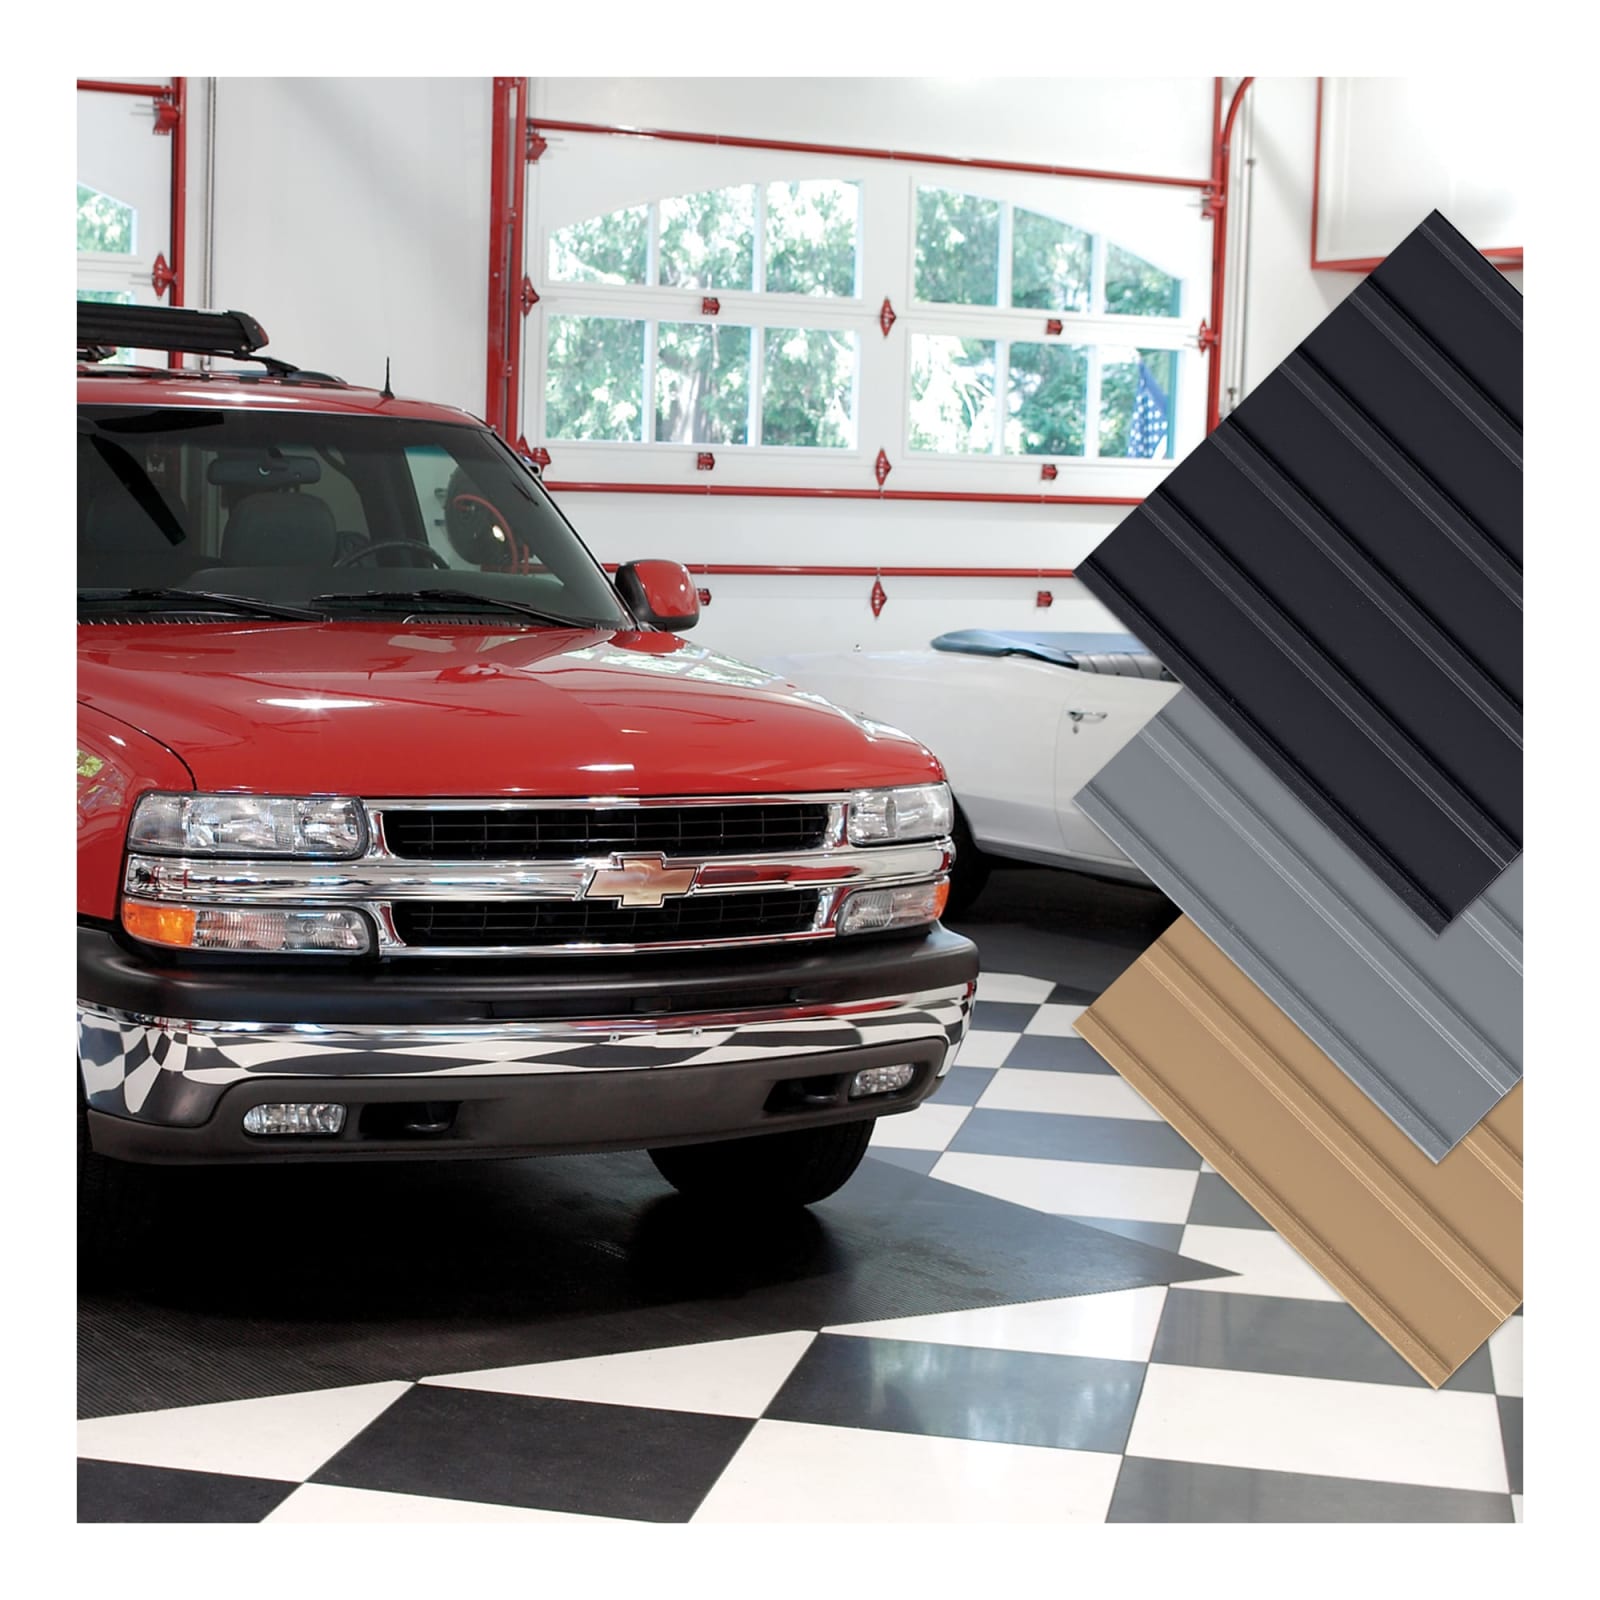 Where To Find Large Rubber Mat Options For Garage Floors